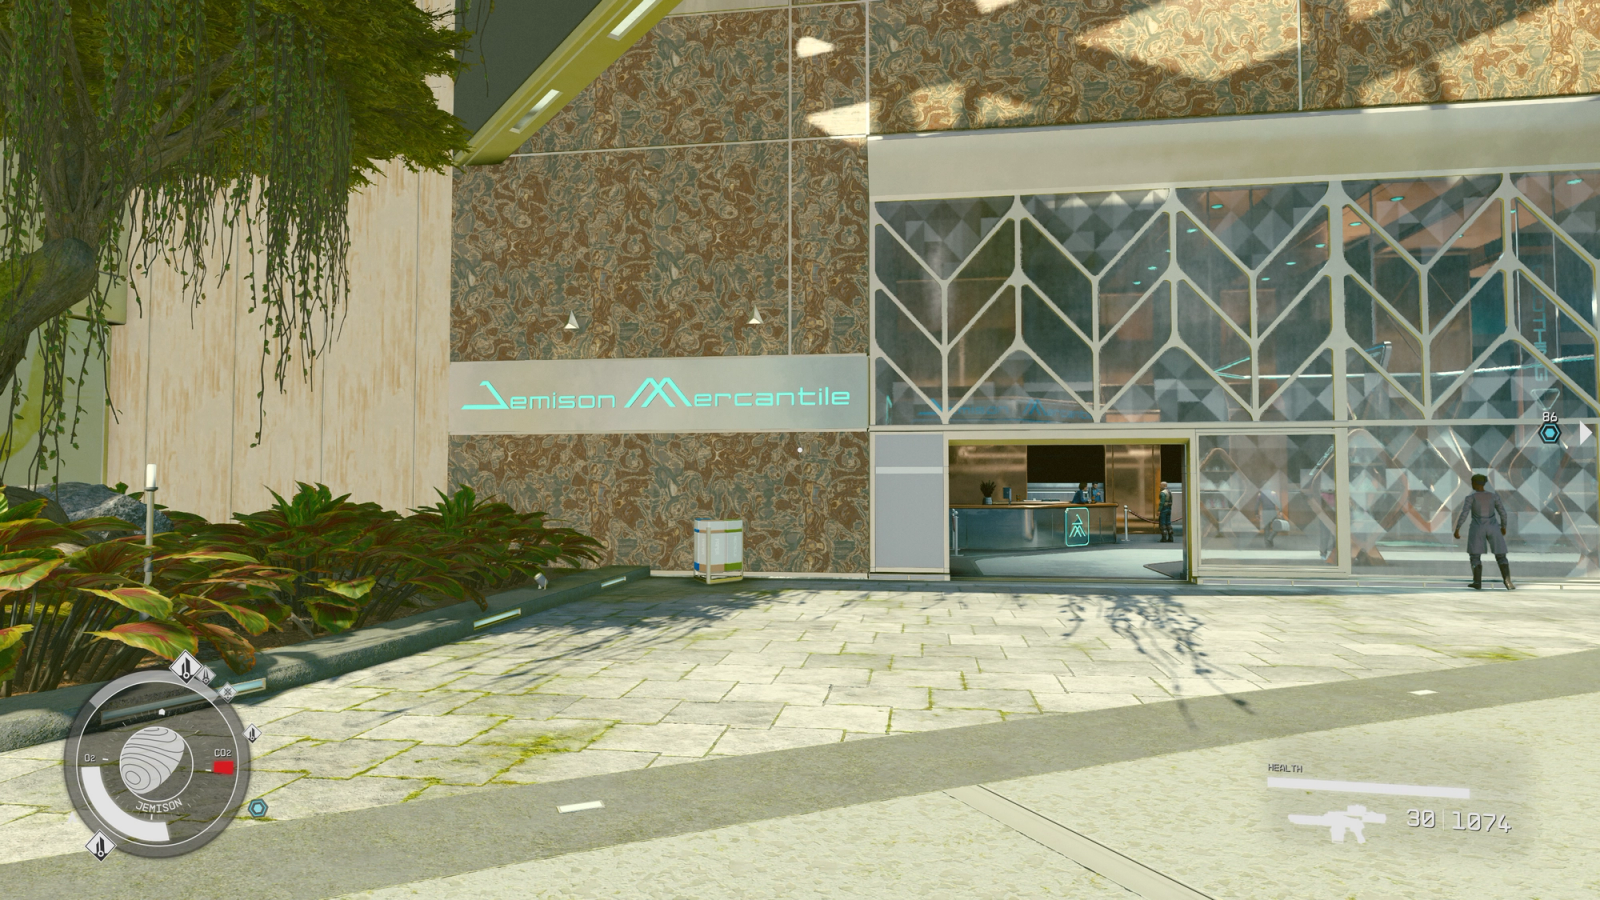 Screenshot of the exterior of Jemison Mercantile, a store in Starfield where you can buy chlorosalines.